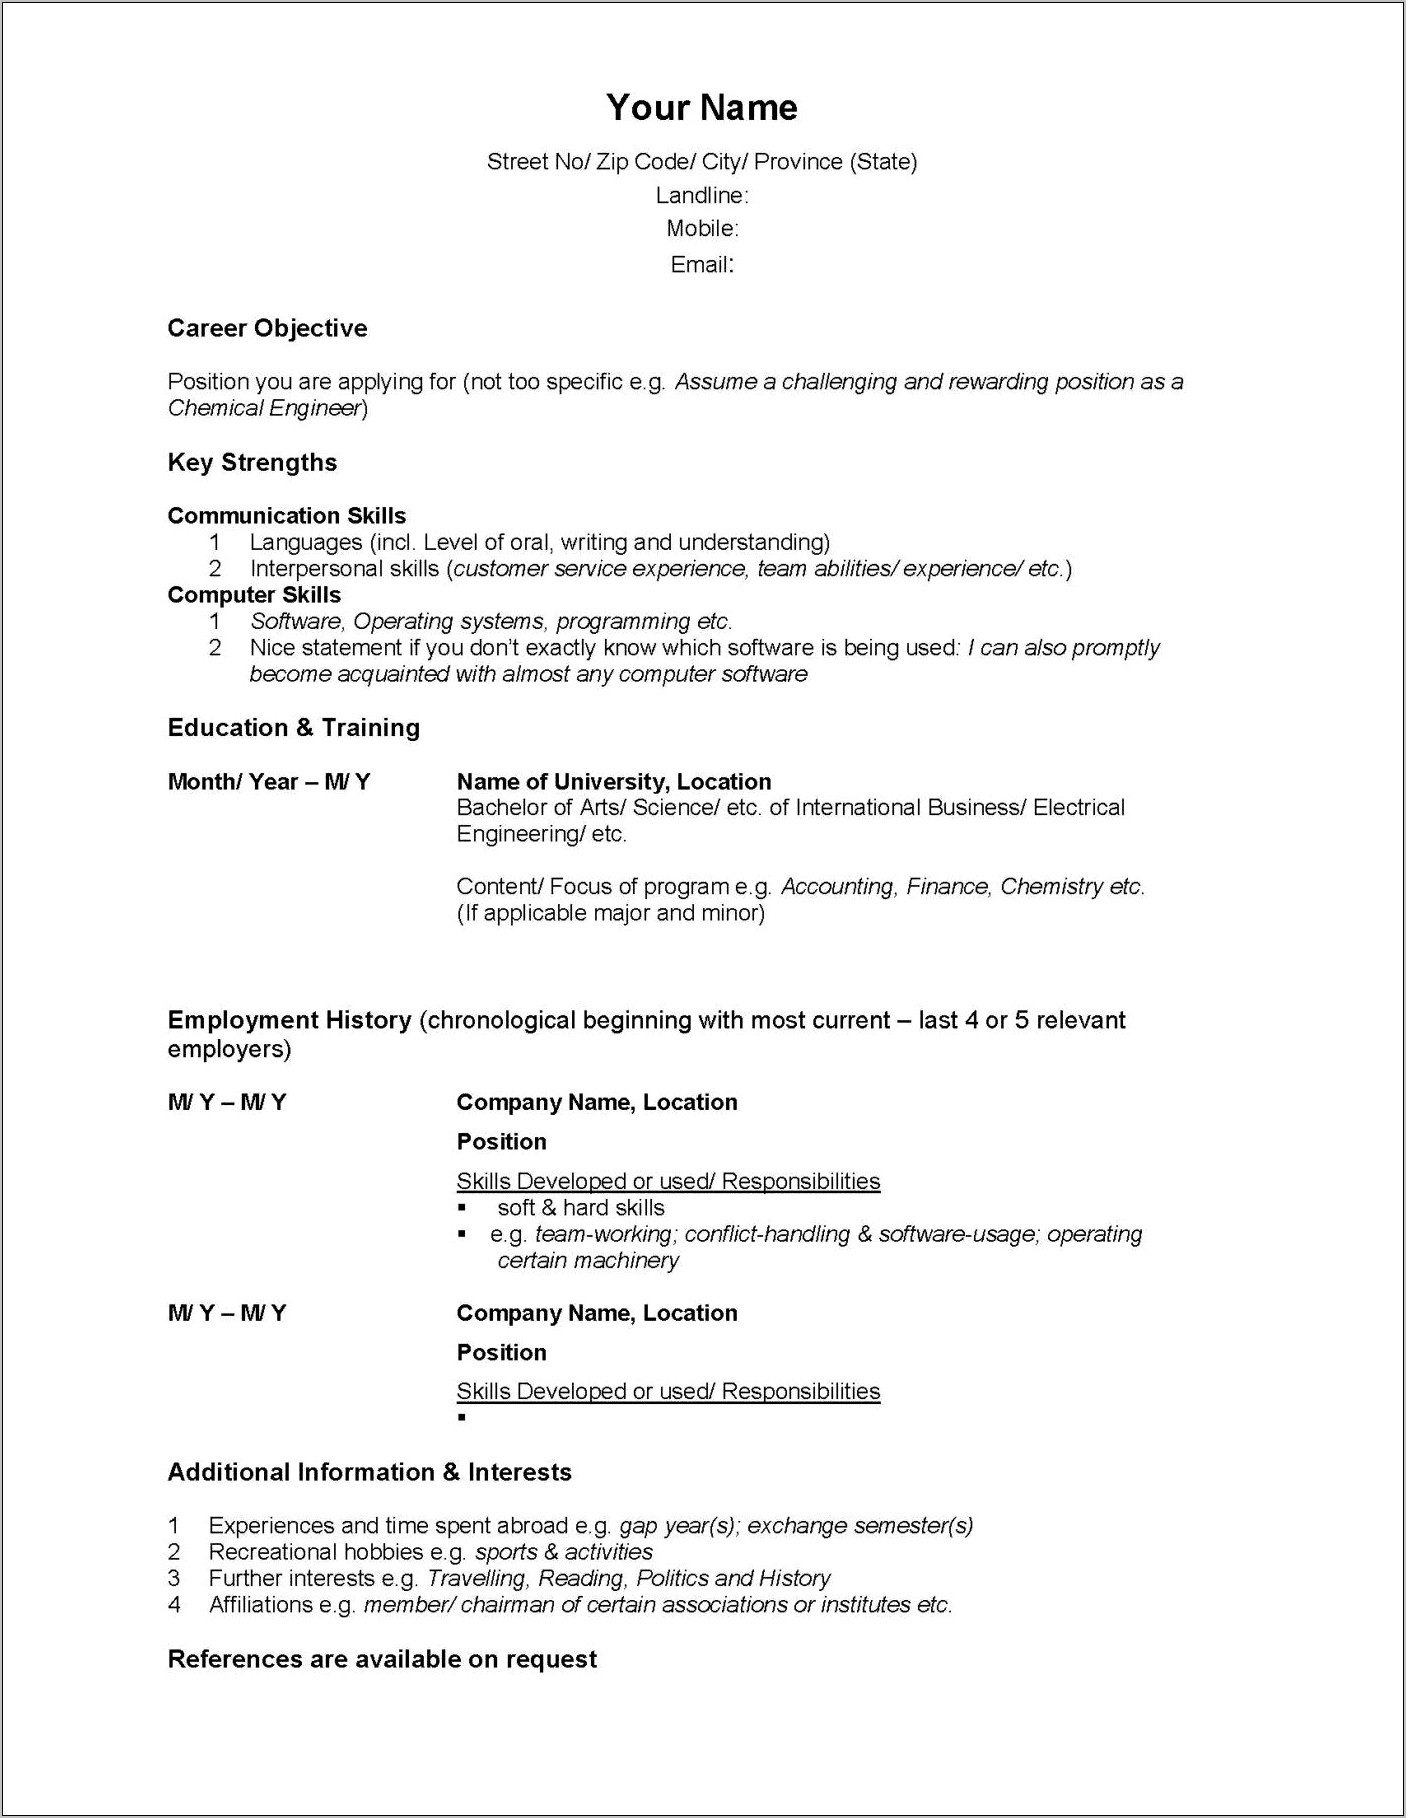 Canadian Resume Template Free 2018